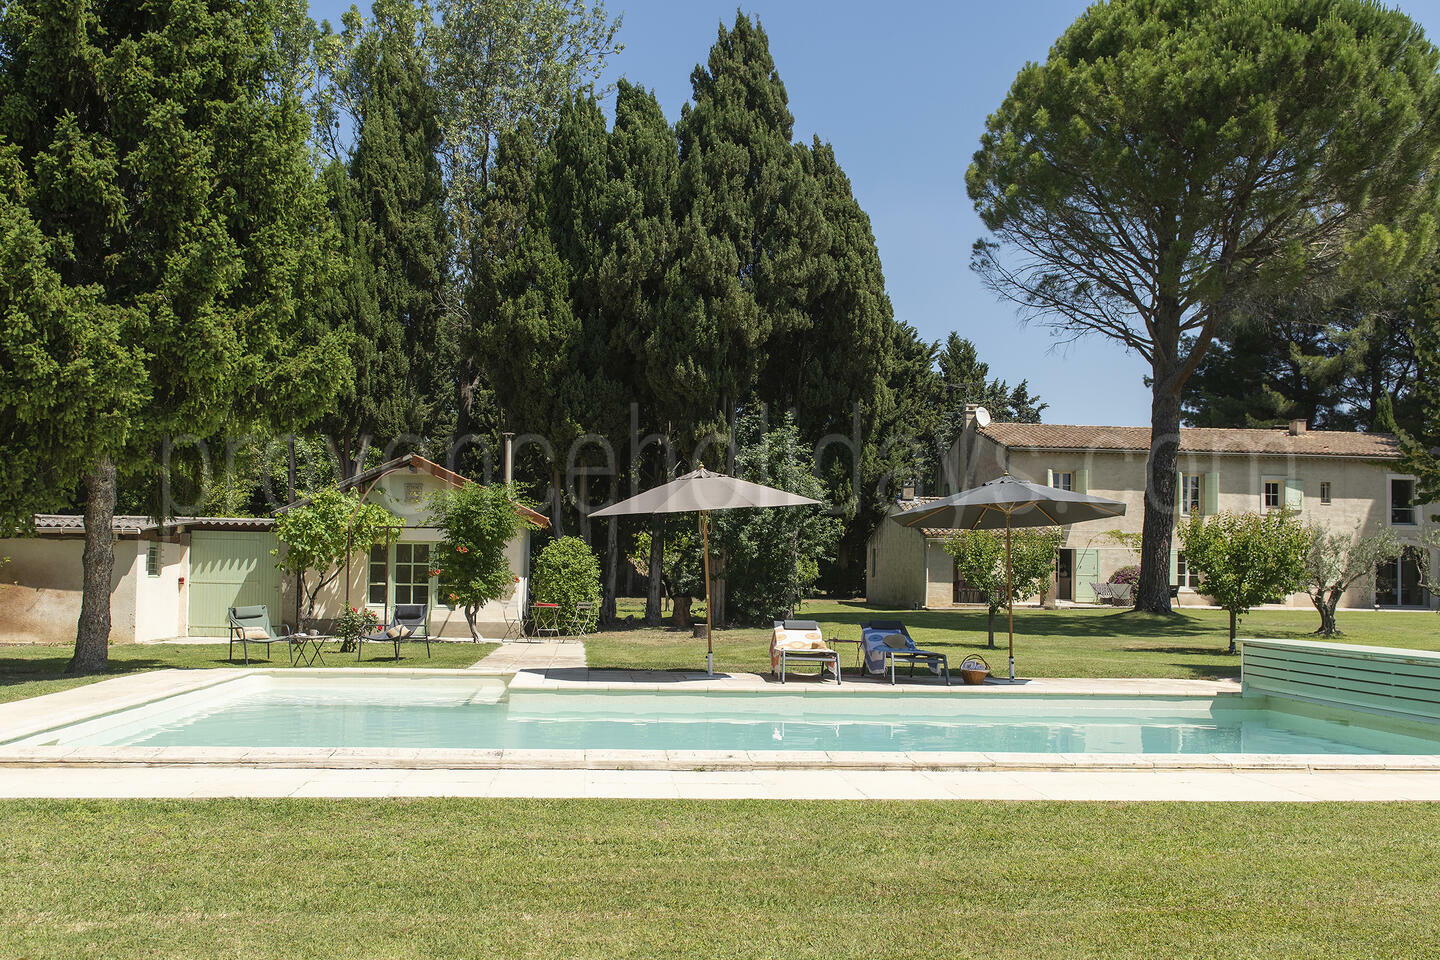 Holiday home with heated swimming pool in Maussane les Alpilles 1 - Mas du Trident: Villa: Pool